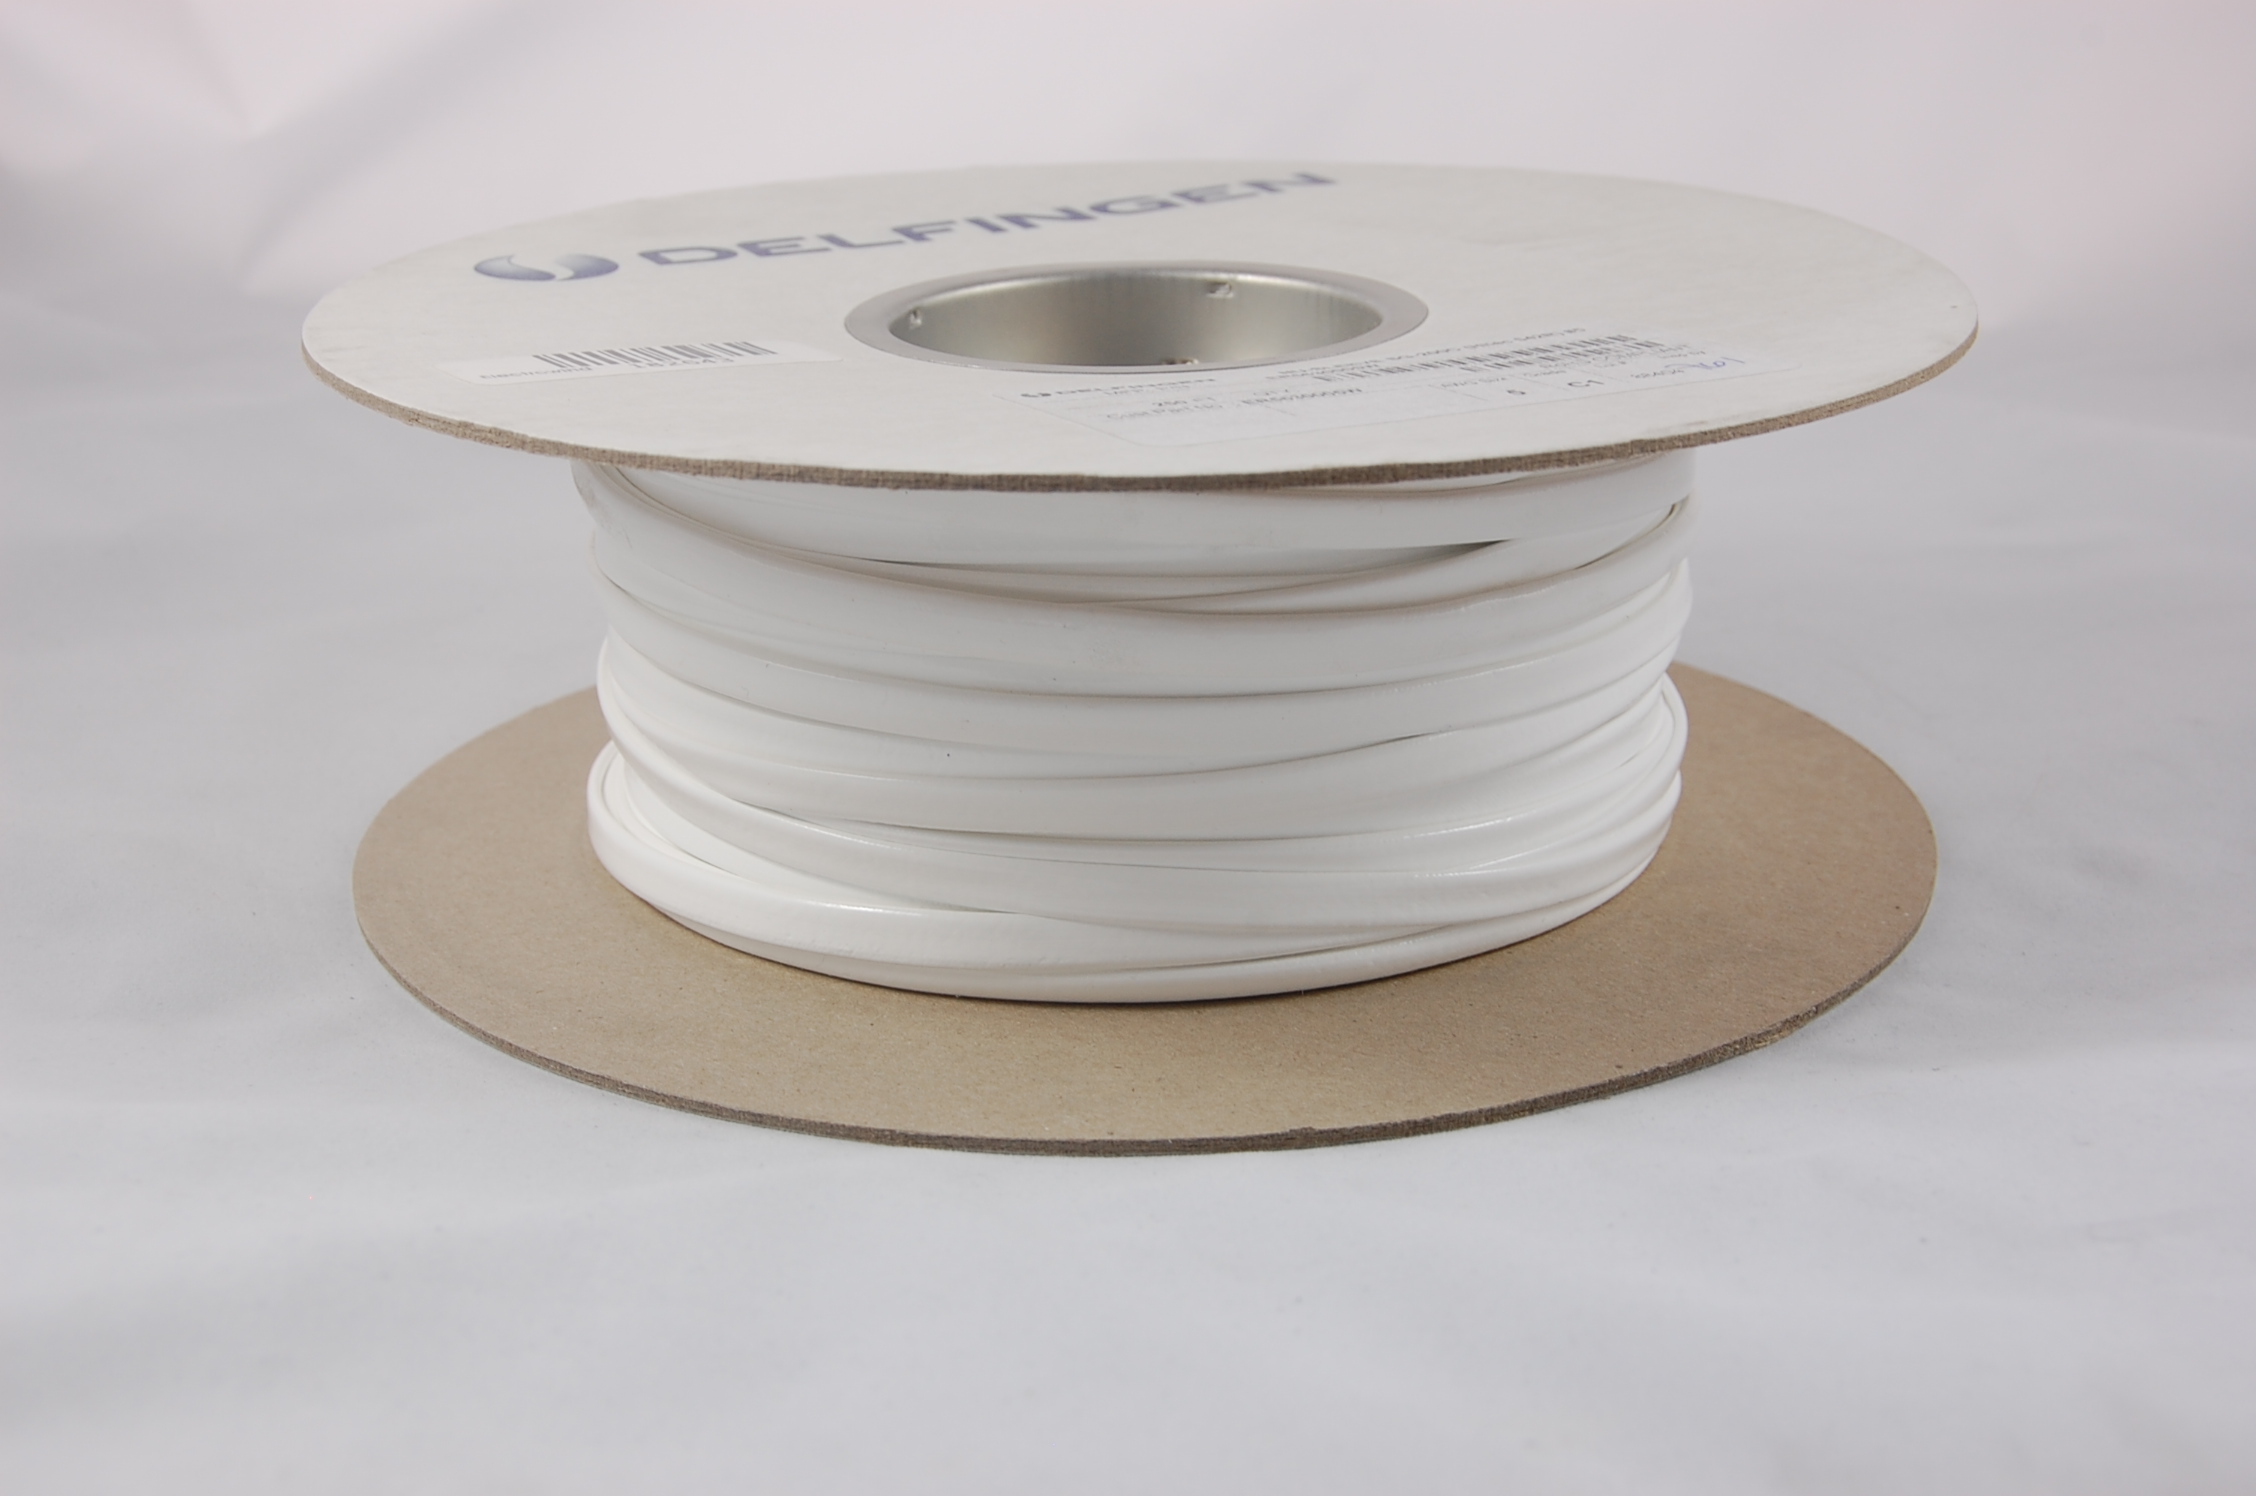 #10 AWG NU-SLEEVE SG-200 C-1 (2500V) Silicone Rubber Coated Braided Fiberglass Sleeving (542F) 200°C, white, 250 FT per spool